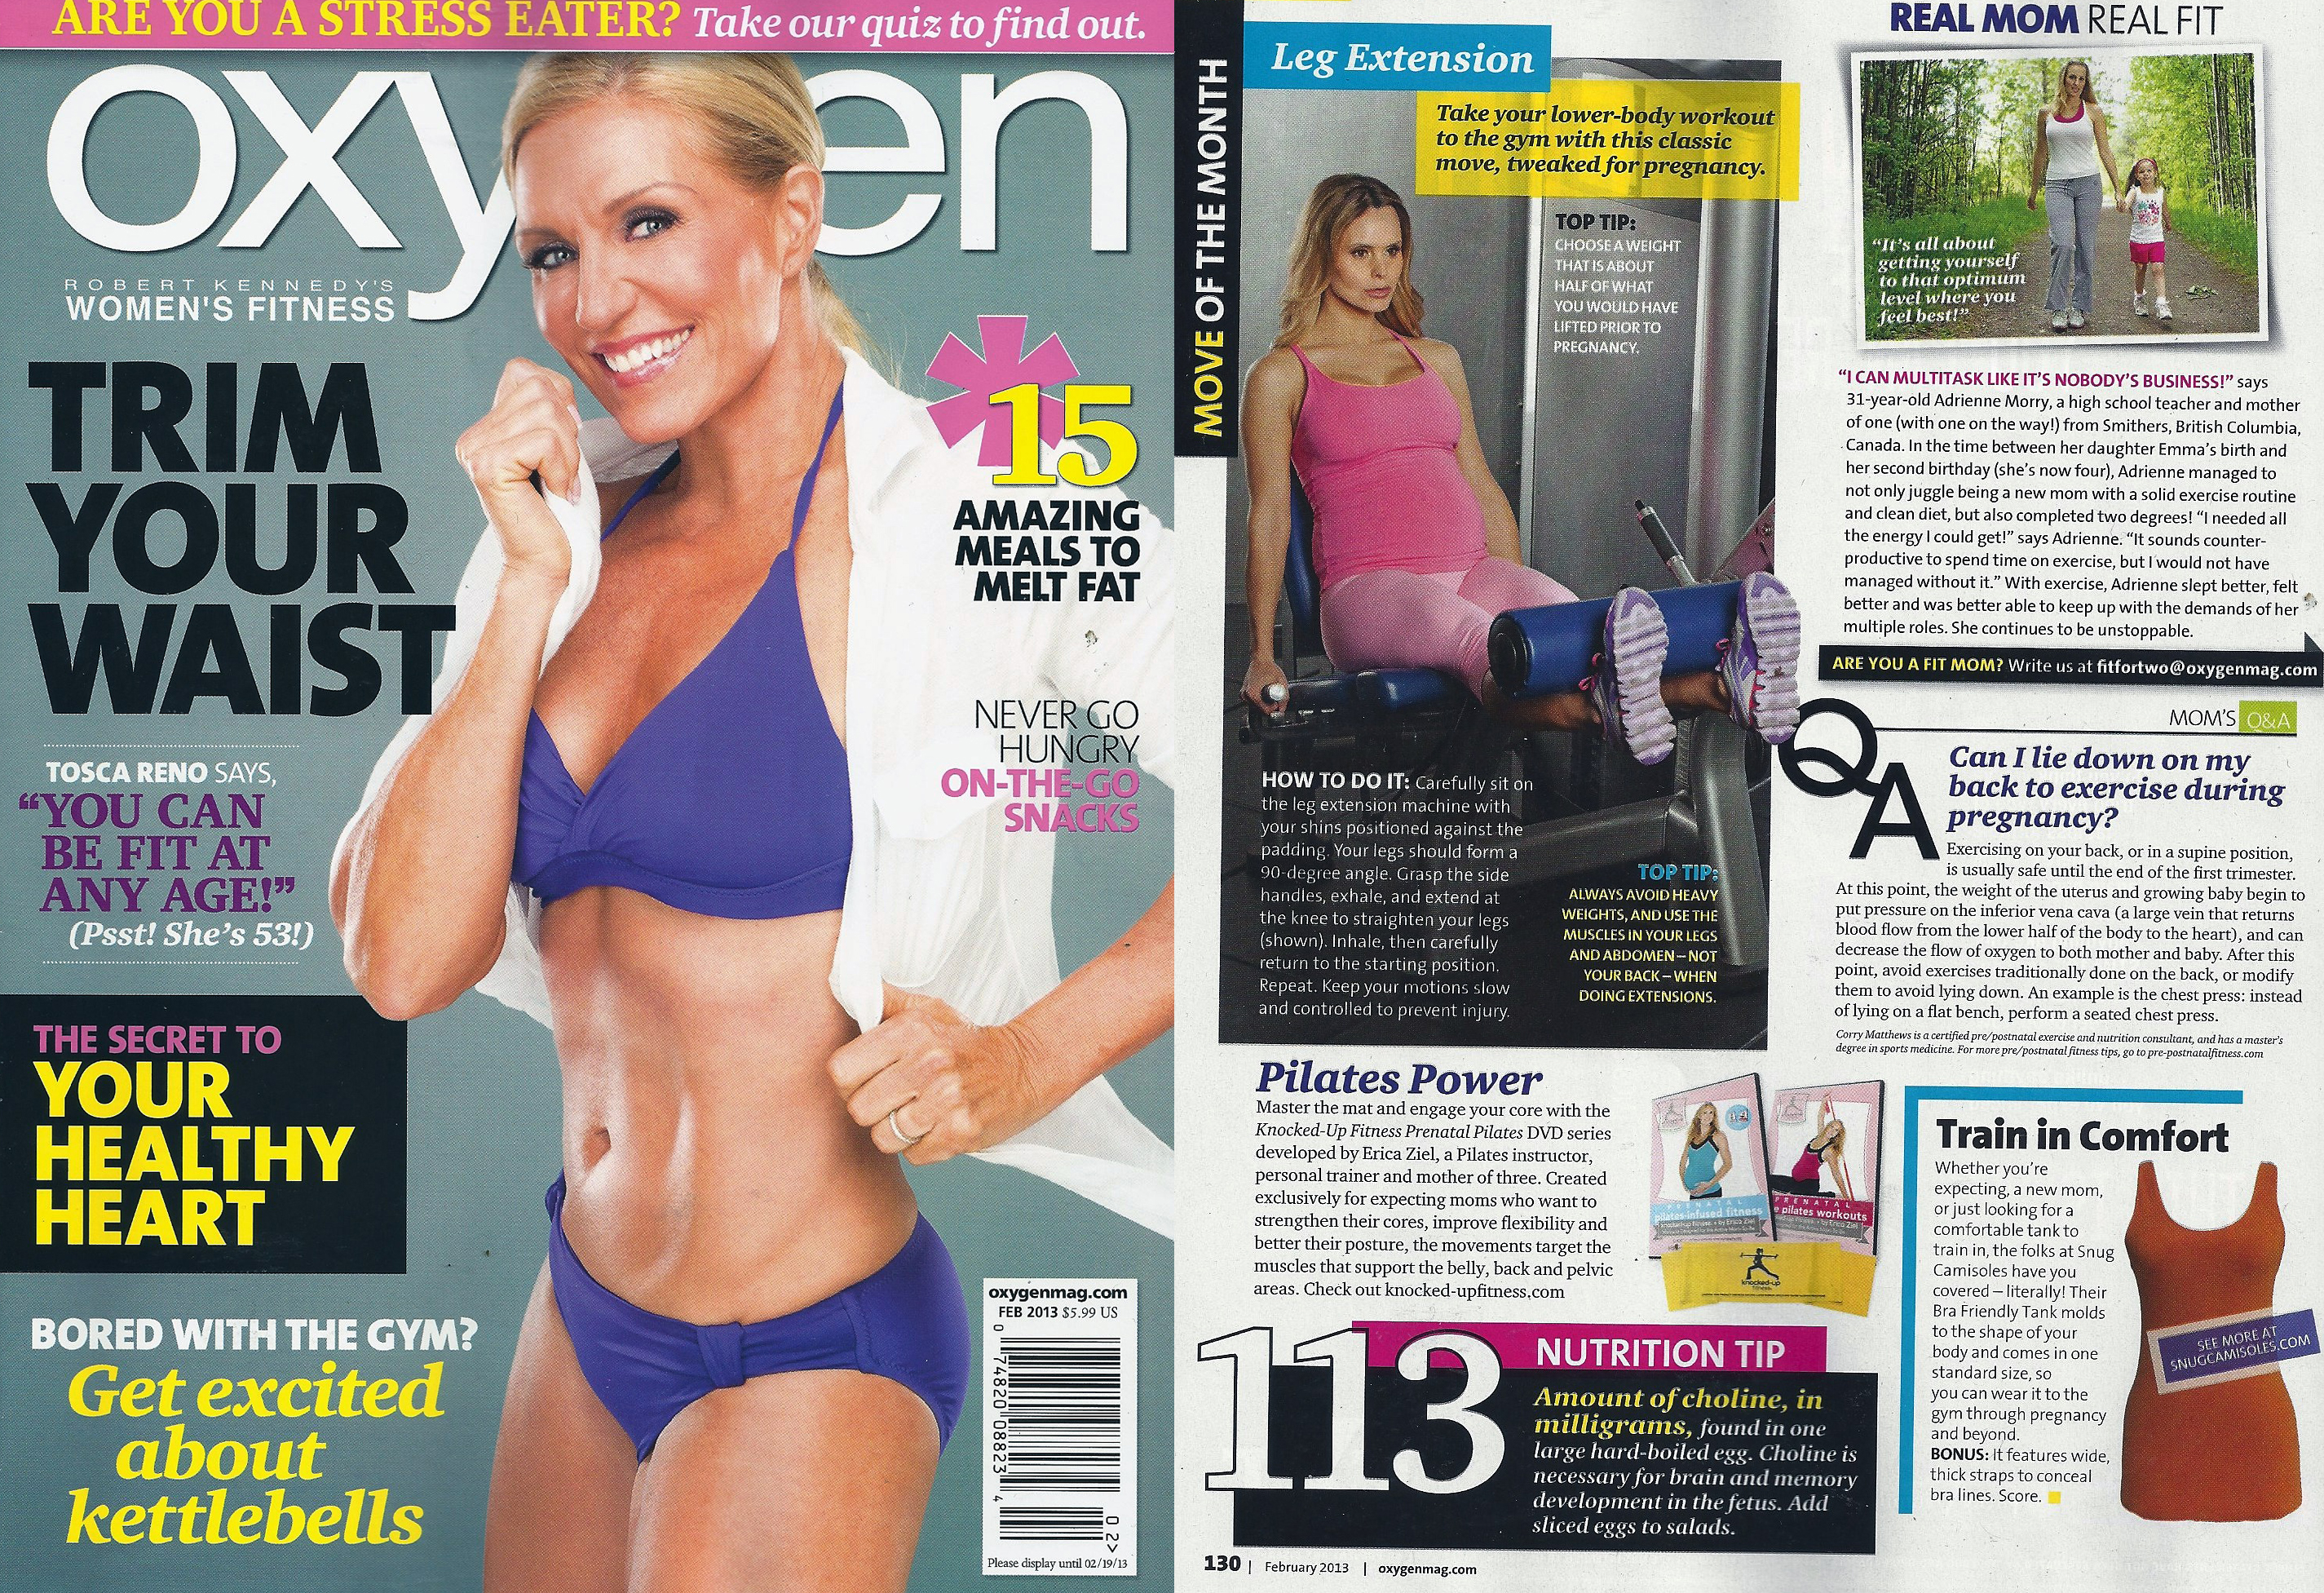 Oxygen Cover Feb 2013